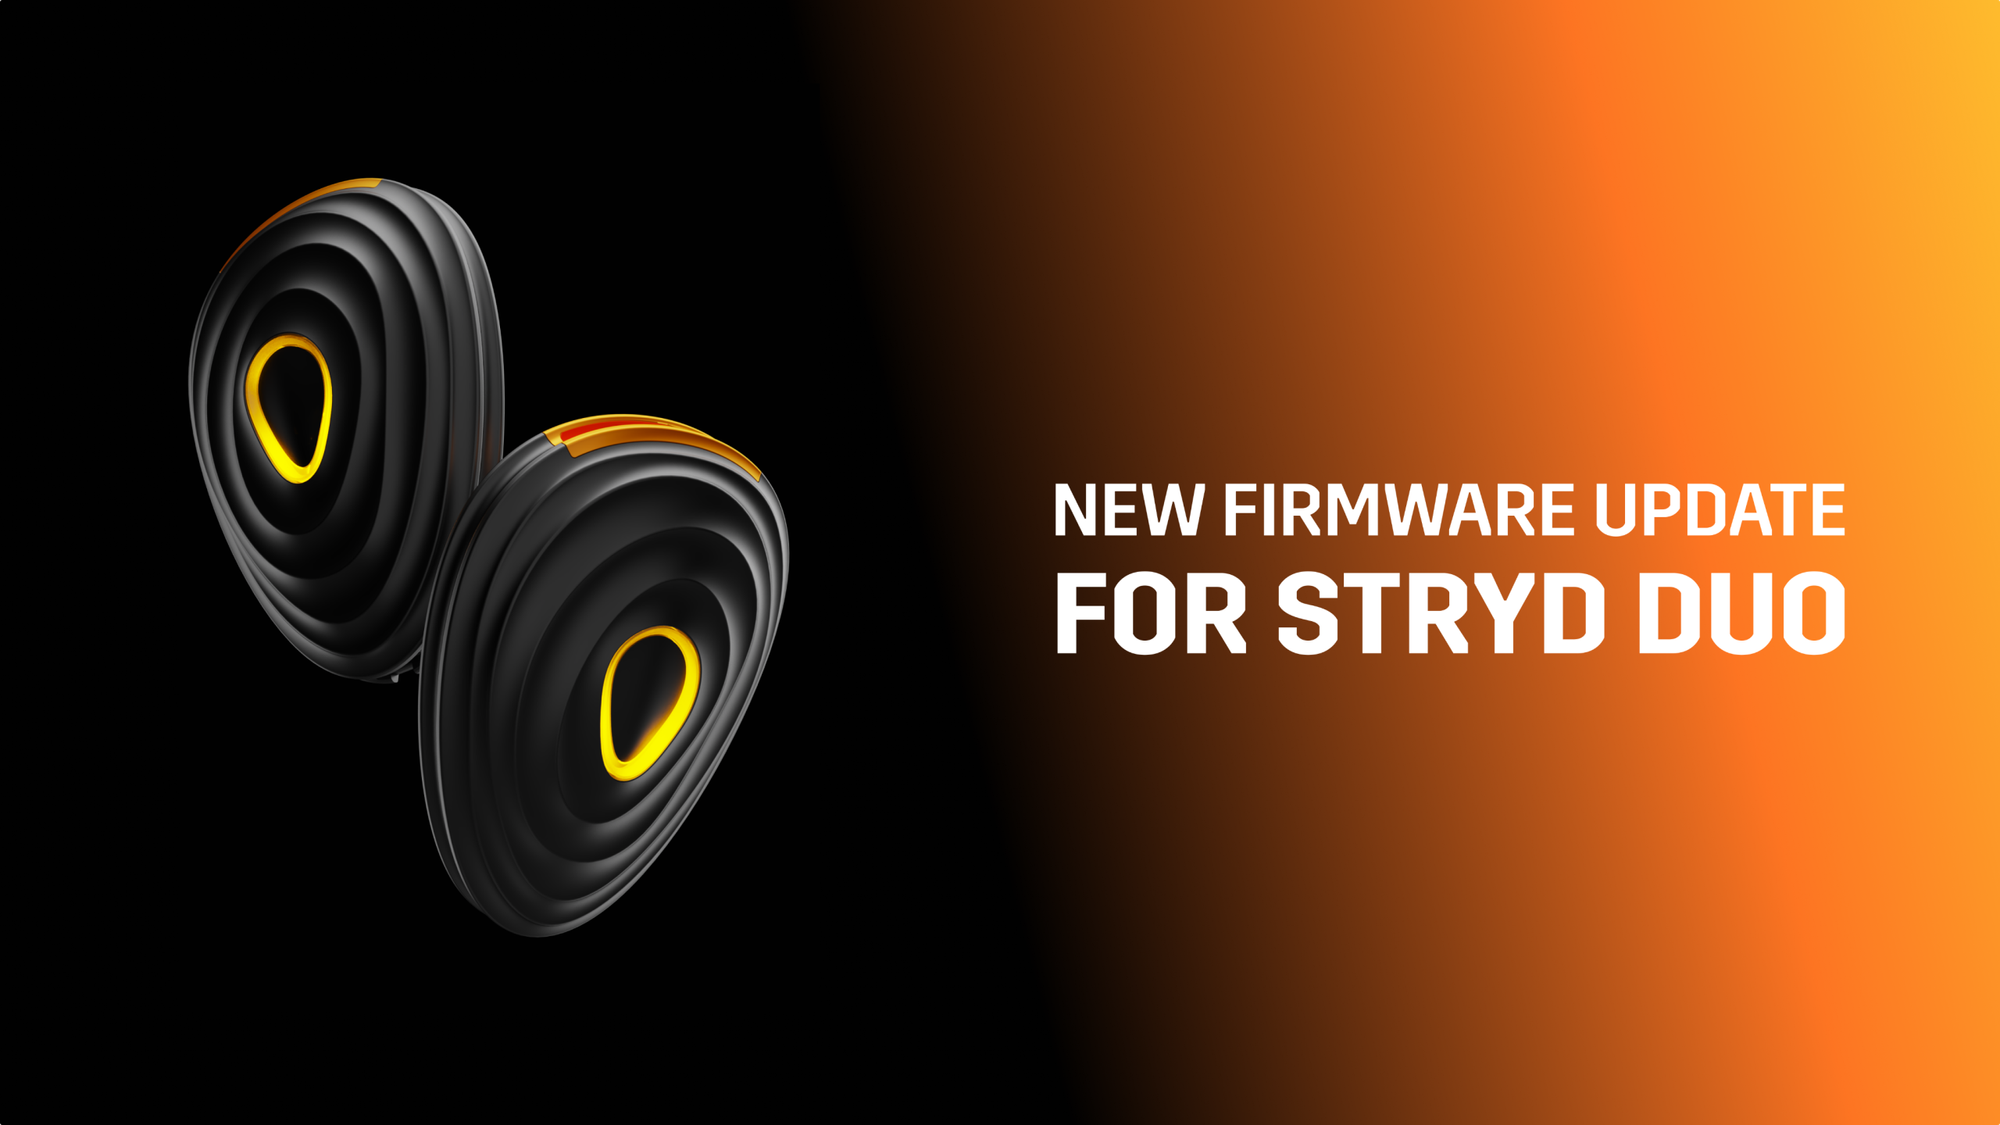 Stability Firmware Update for Stryd Duo | Firmware 2.1.31.5.5